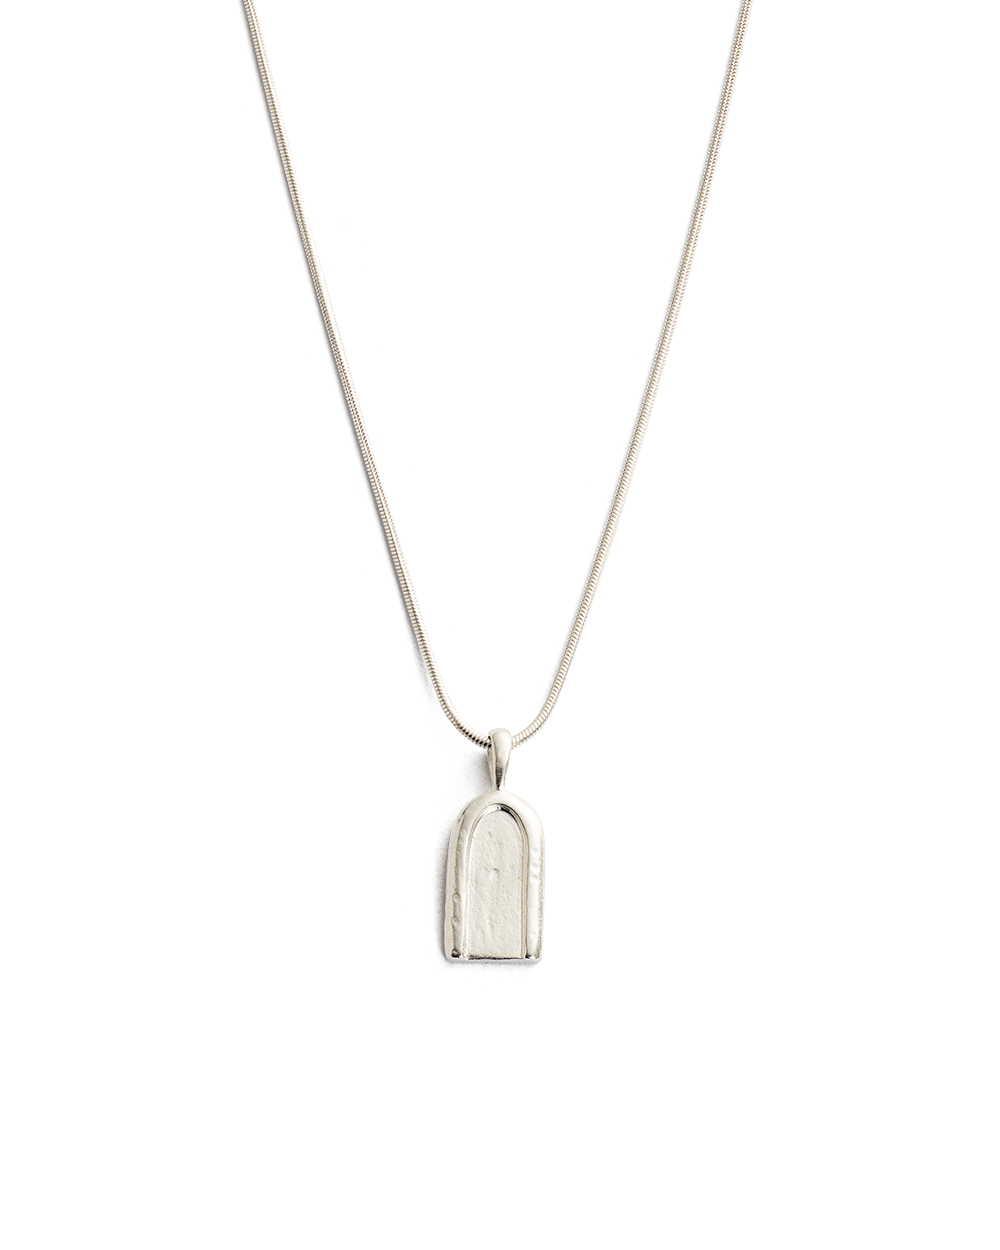 PETITE ARCH NECKLACE (STERLING SILVER) - IMAGE 1